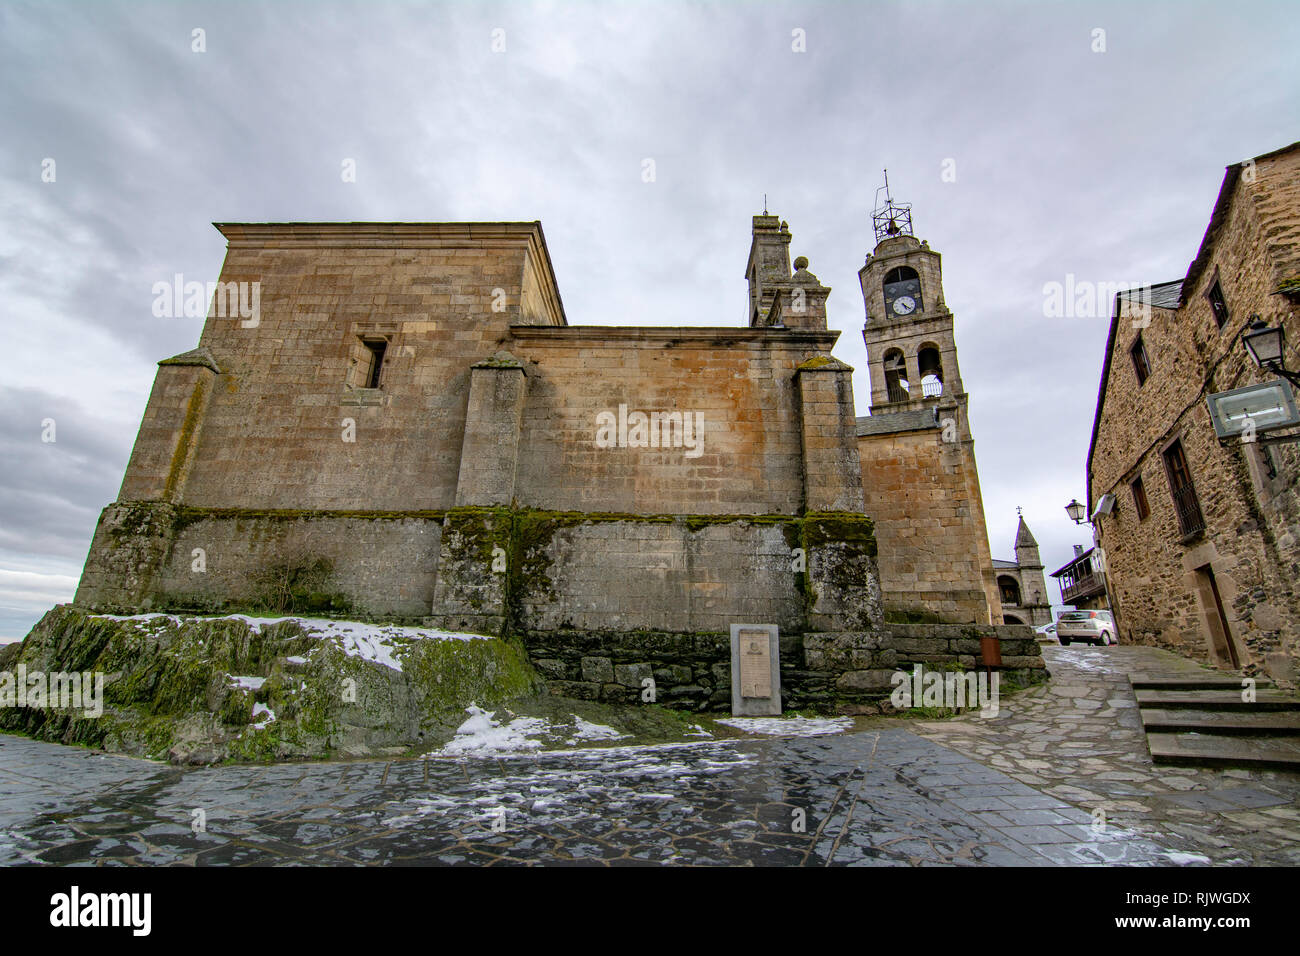 Puebla de Sanabria, Zamora, Spain; January 2017: This is the church called Our lady of Azogue in the village of Puebla de Sanabria in the province of  Stock Photo